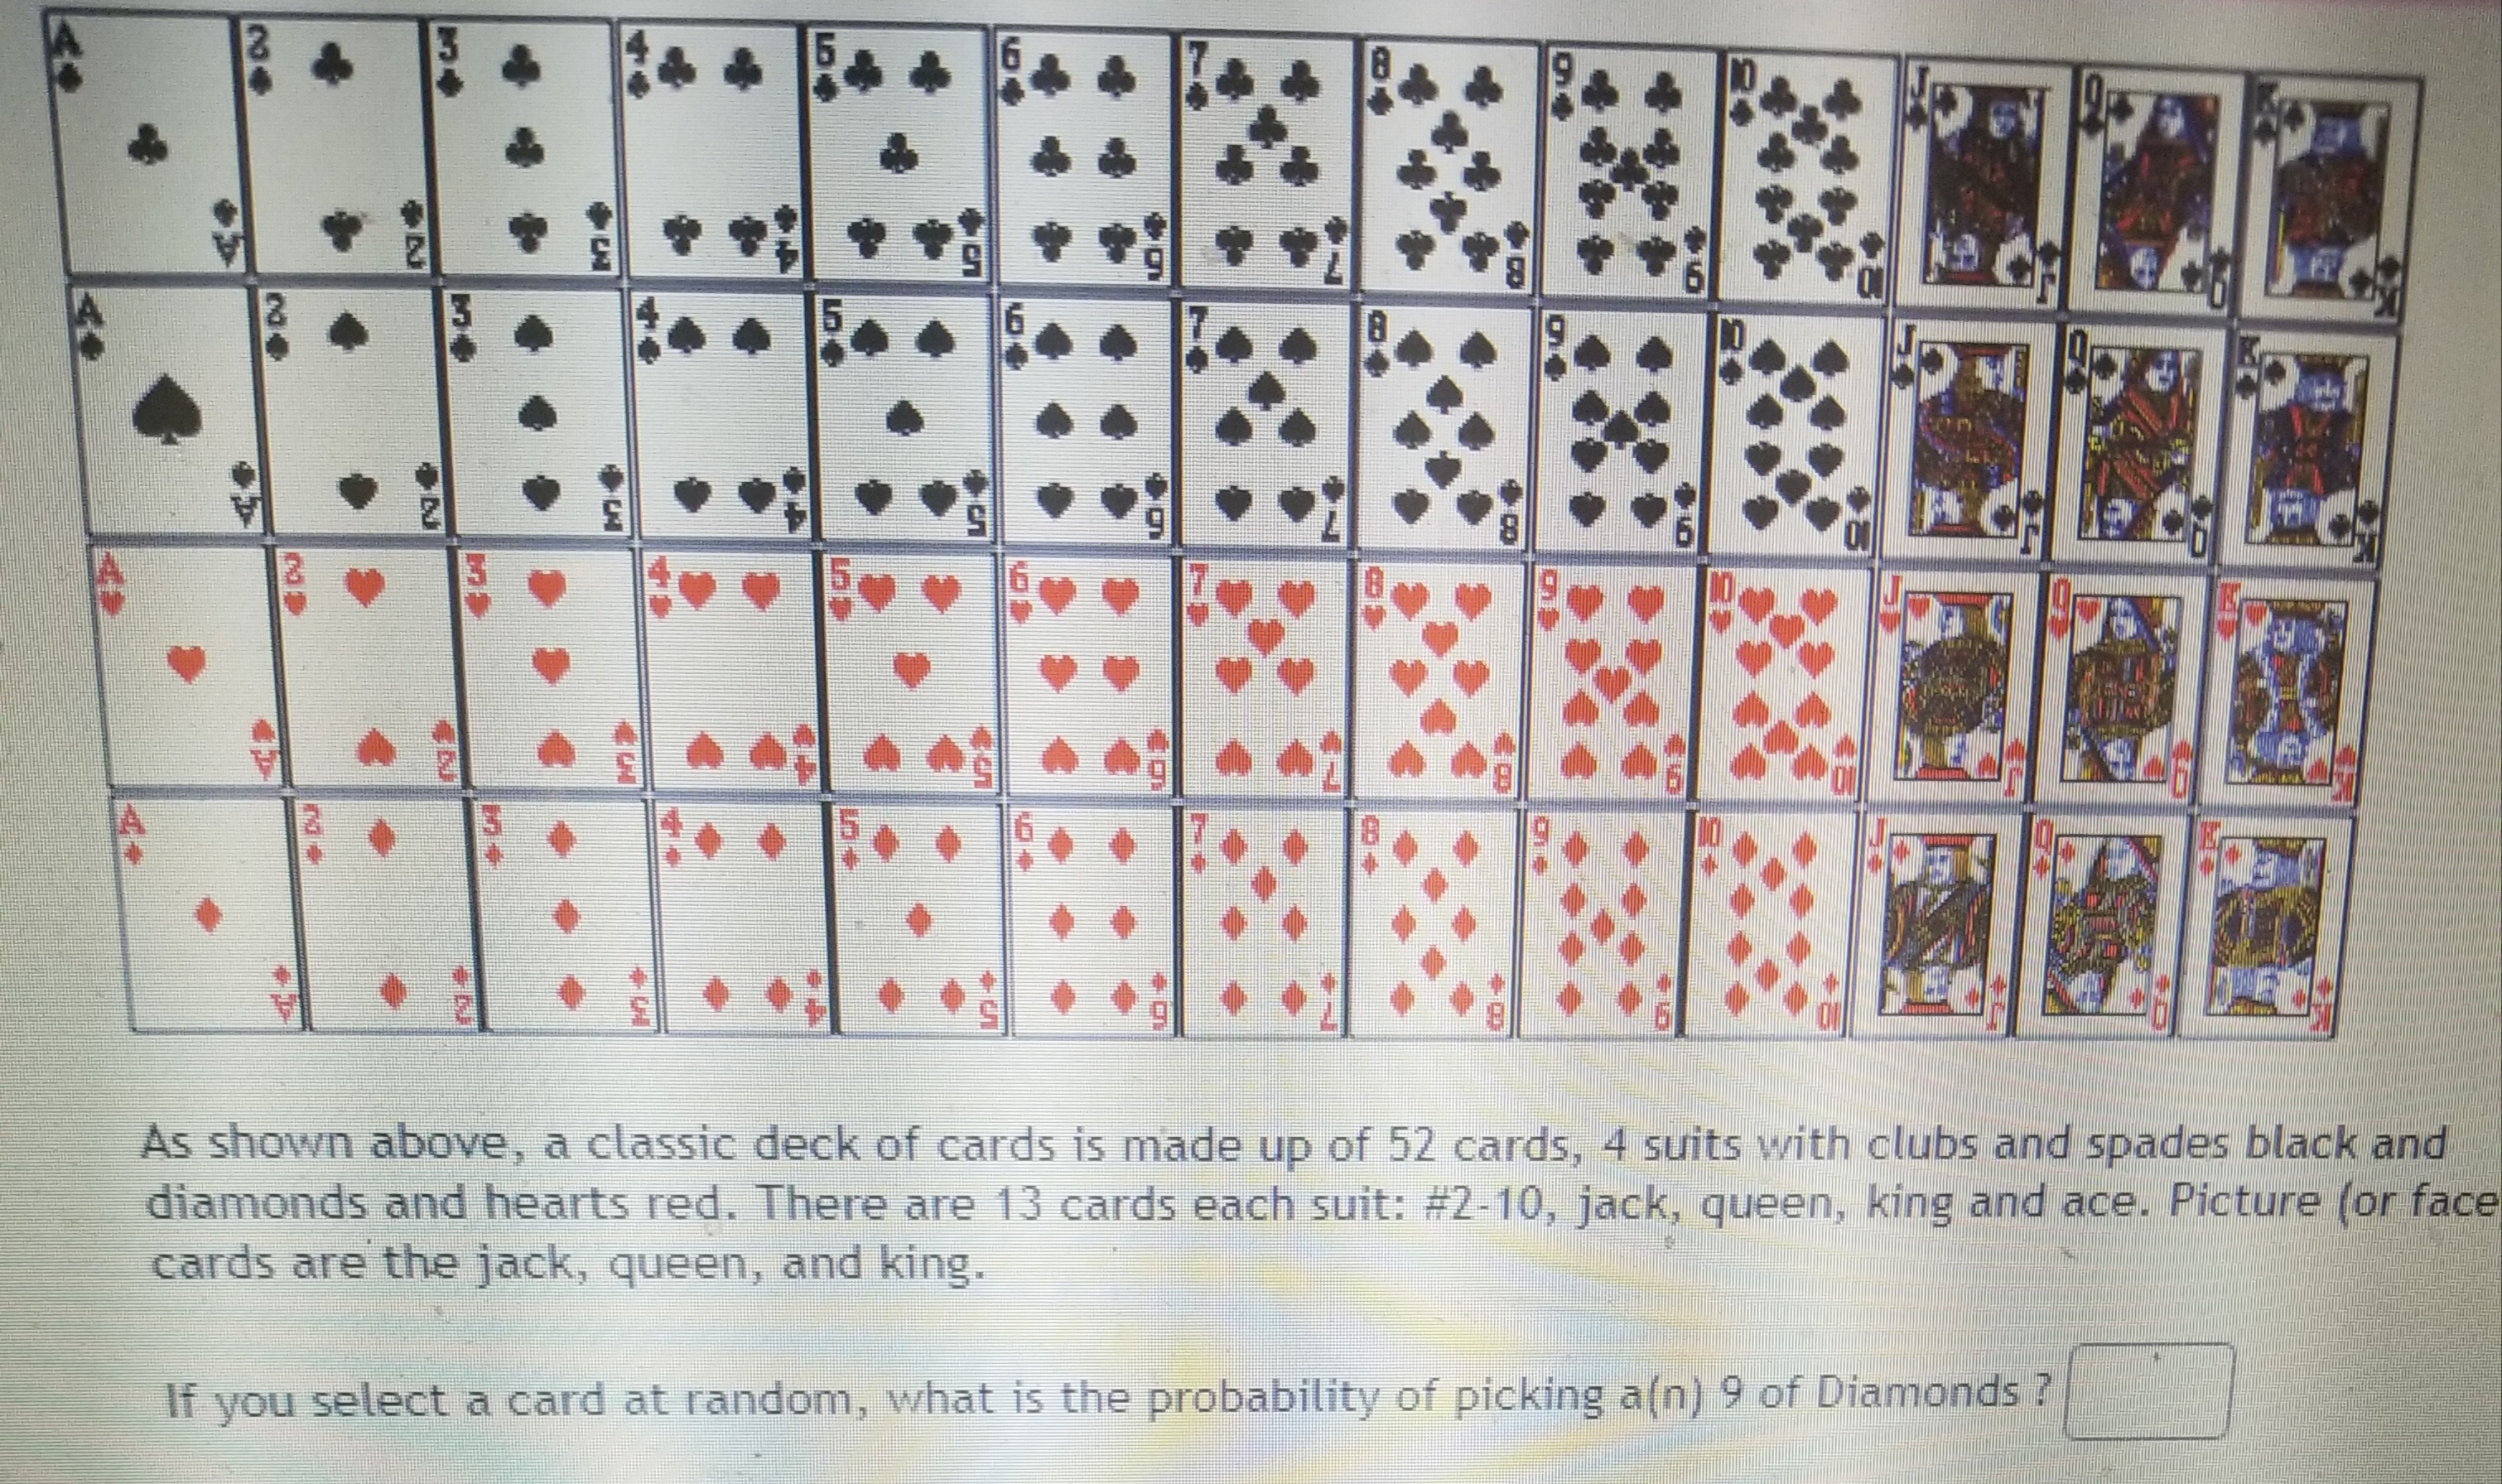 As shown above, a classic deck of cards is made up of 52 cards, 4 suits with clubs and spades black and
diamonds and hearts red. There are 13 cards each suit: #2-10, jack, queen, king and ace. Picture (or fa
cards are the jack, queen, and king.
If you select a card at random, what is the probability of picking a(n) 9 of Diamonds ?
